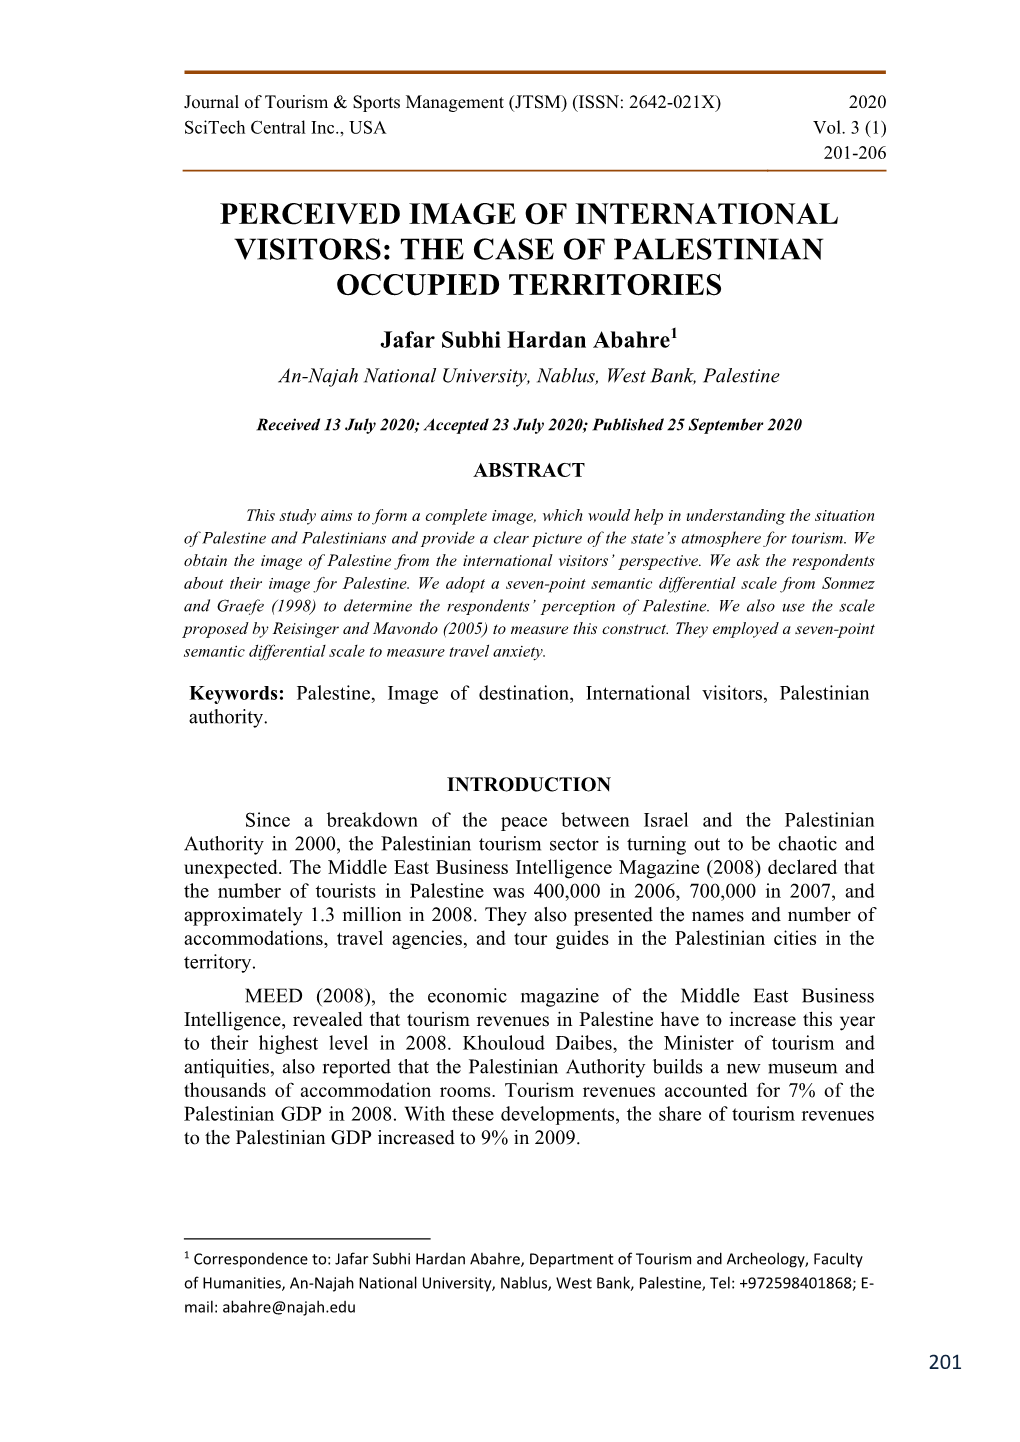 The Case of Palestinian Occupied Territories